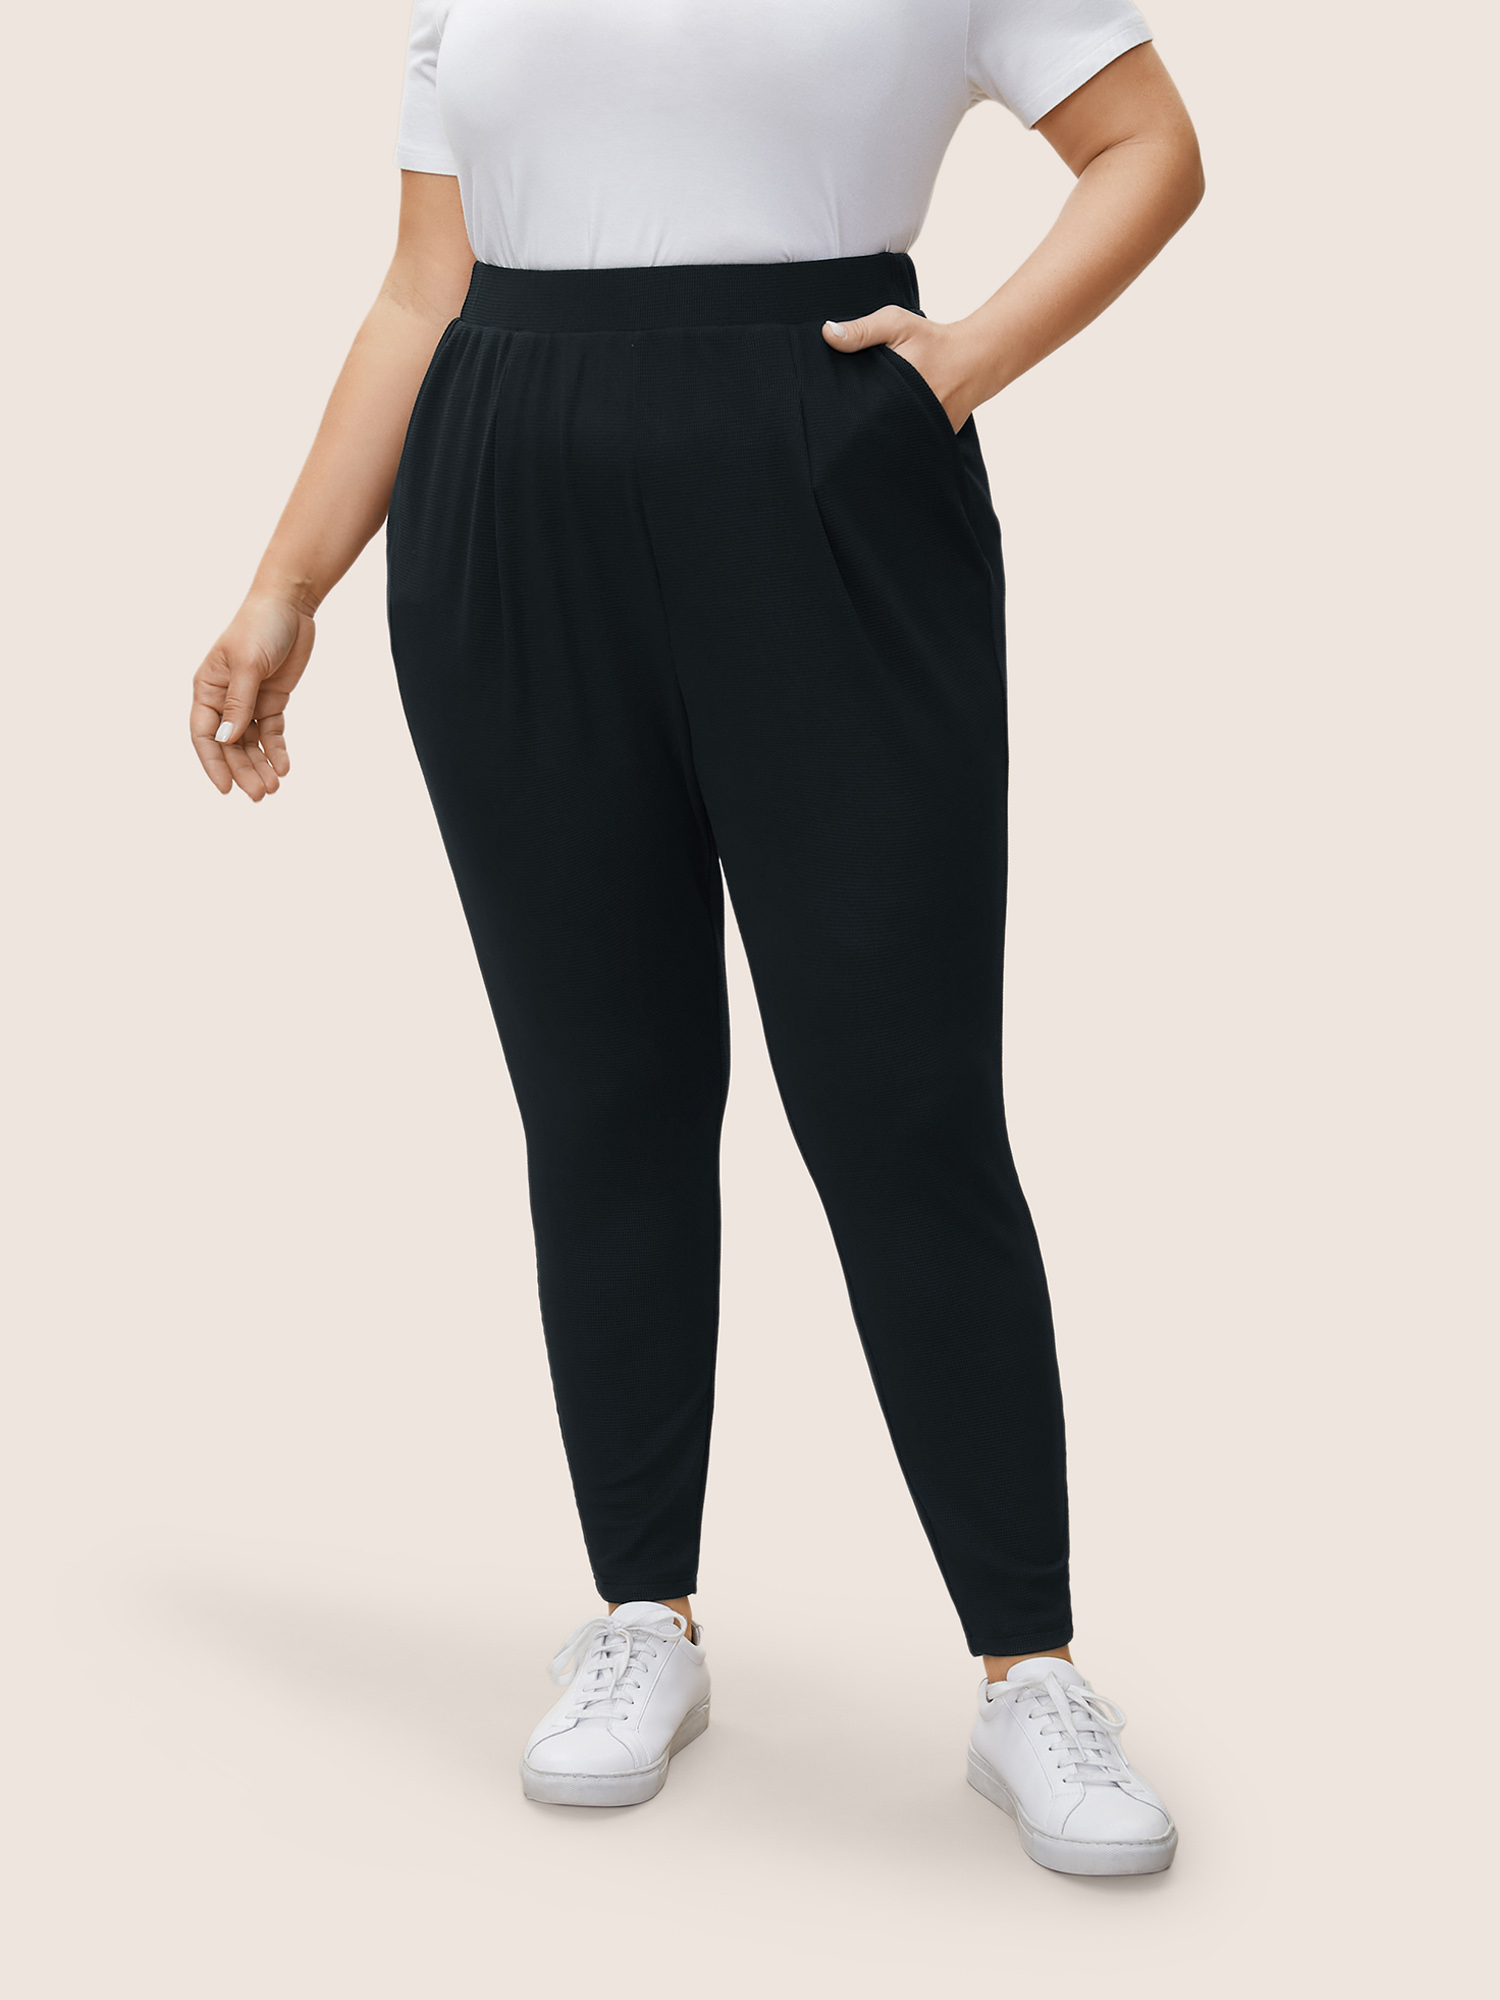 

Plus Size Solid Mid Rise Gathered Elastic Waist Pants Women Black Work From Home Mid Rise Work Pants BloomChic